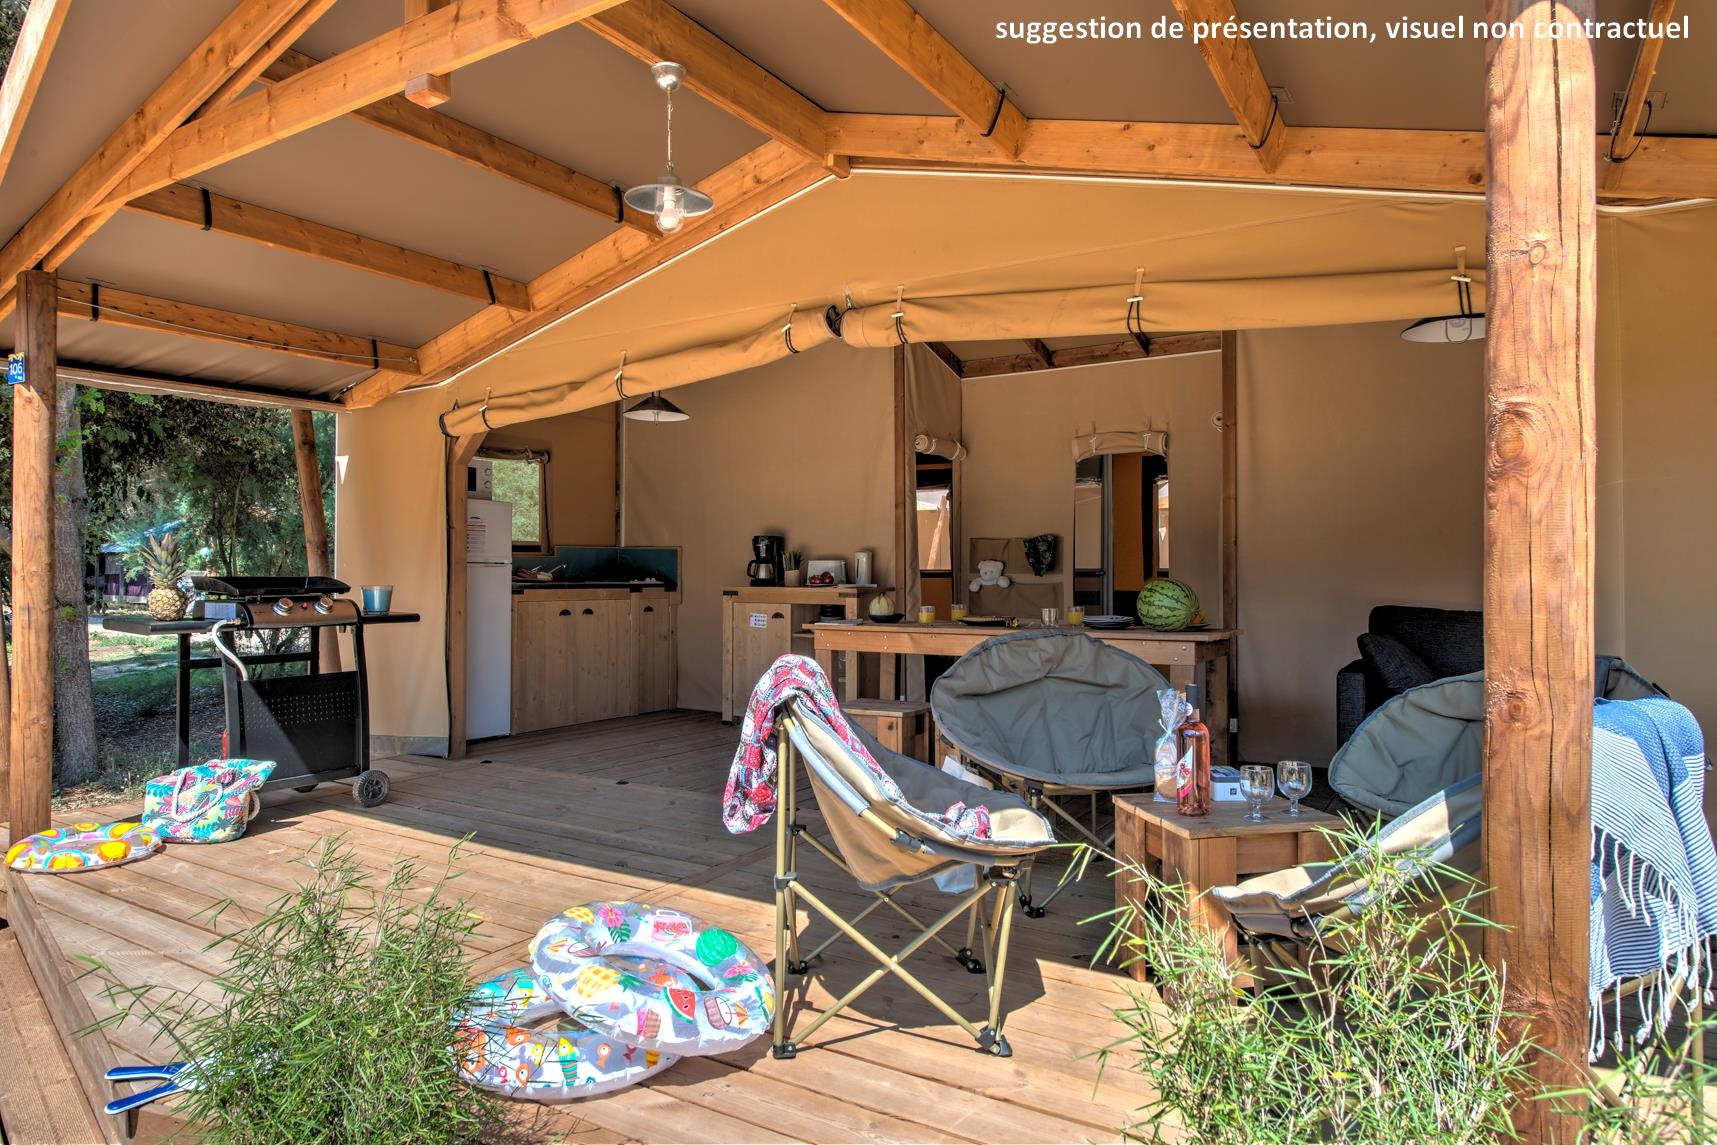 Accommodation - Cabin Cotton Toilée Confort 32M² (2 Bedrooms) + Sheltered Terrace 11M² + Tv - Flower Camping Le Conleau